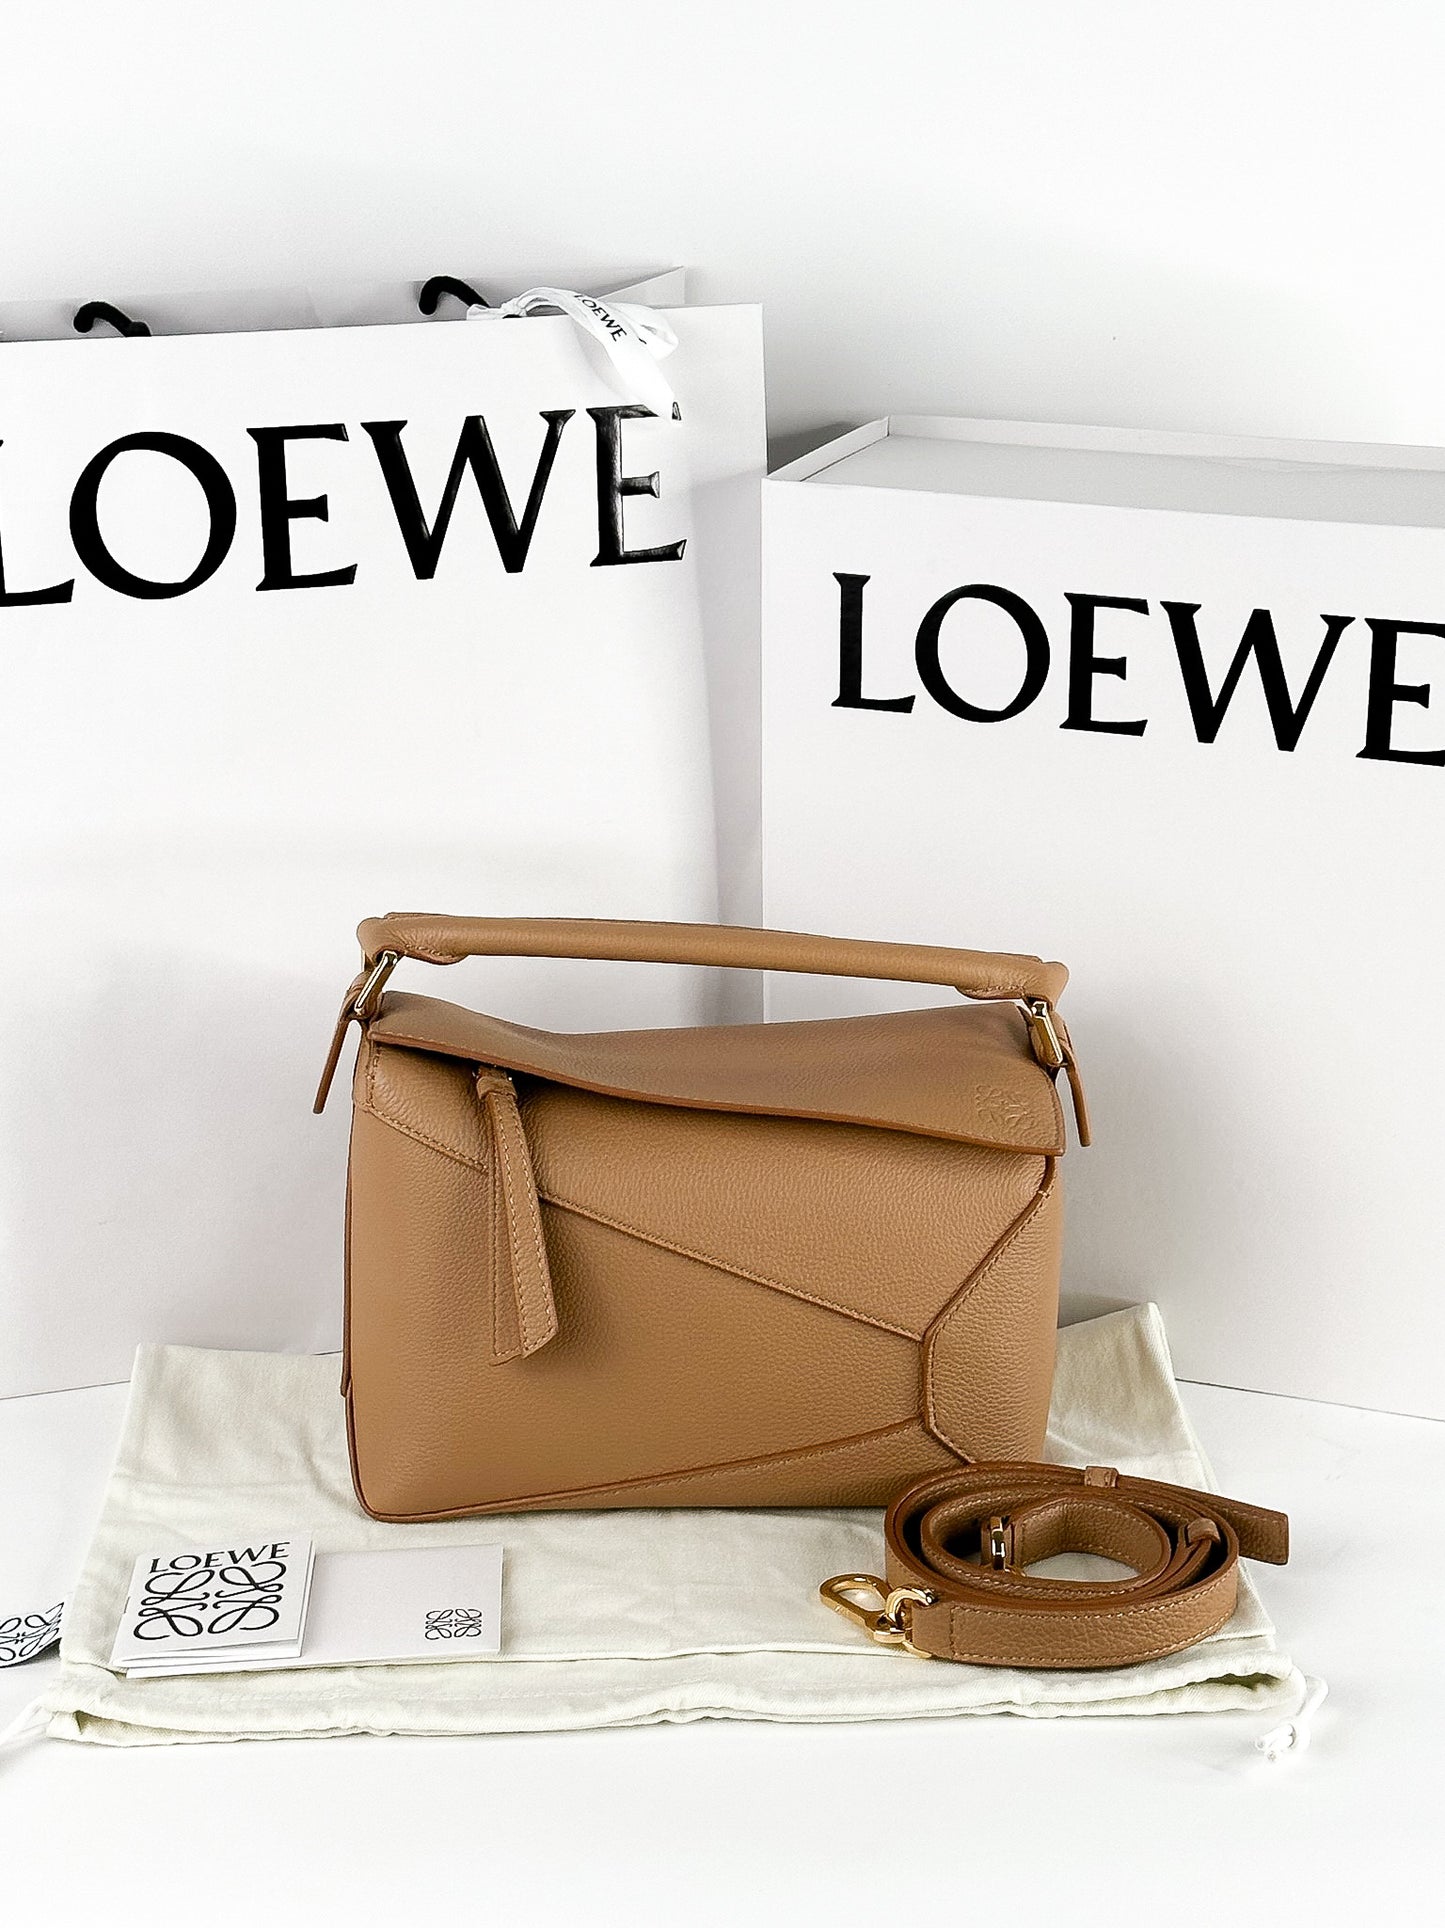 Loewe Puzzle Edge Small Leather Handbag in Toffee